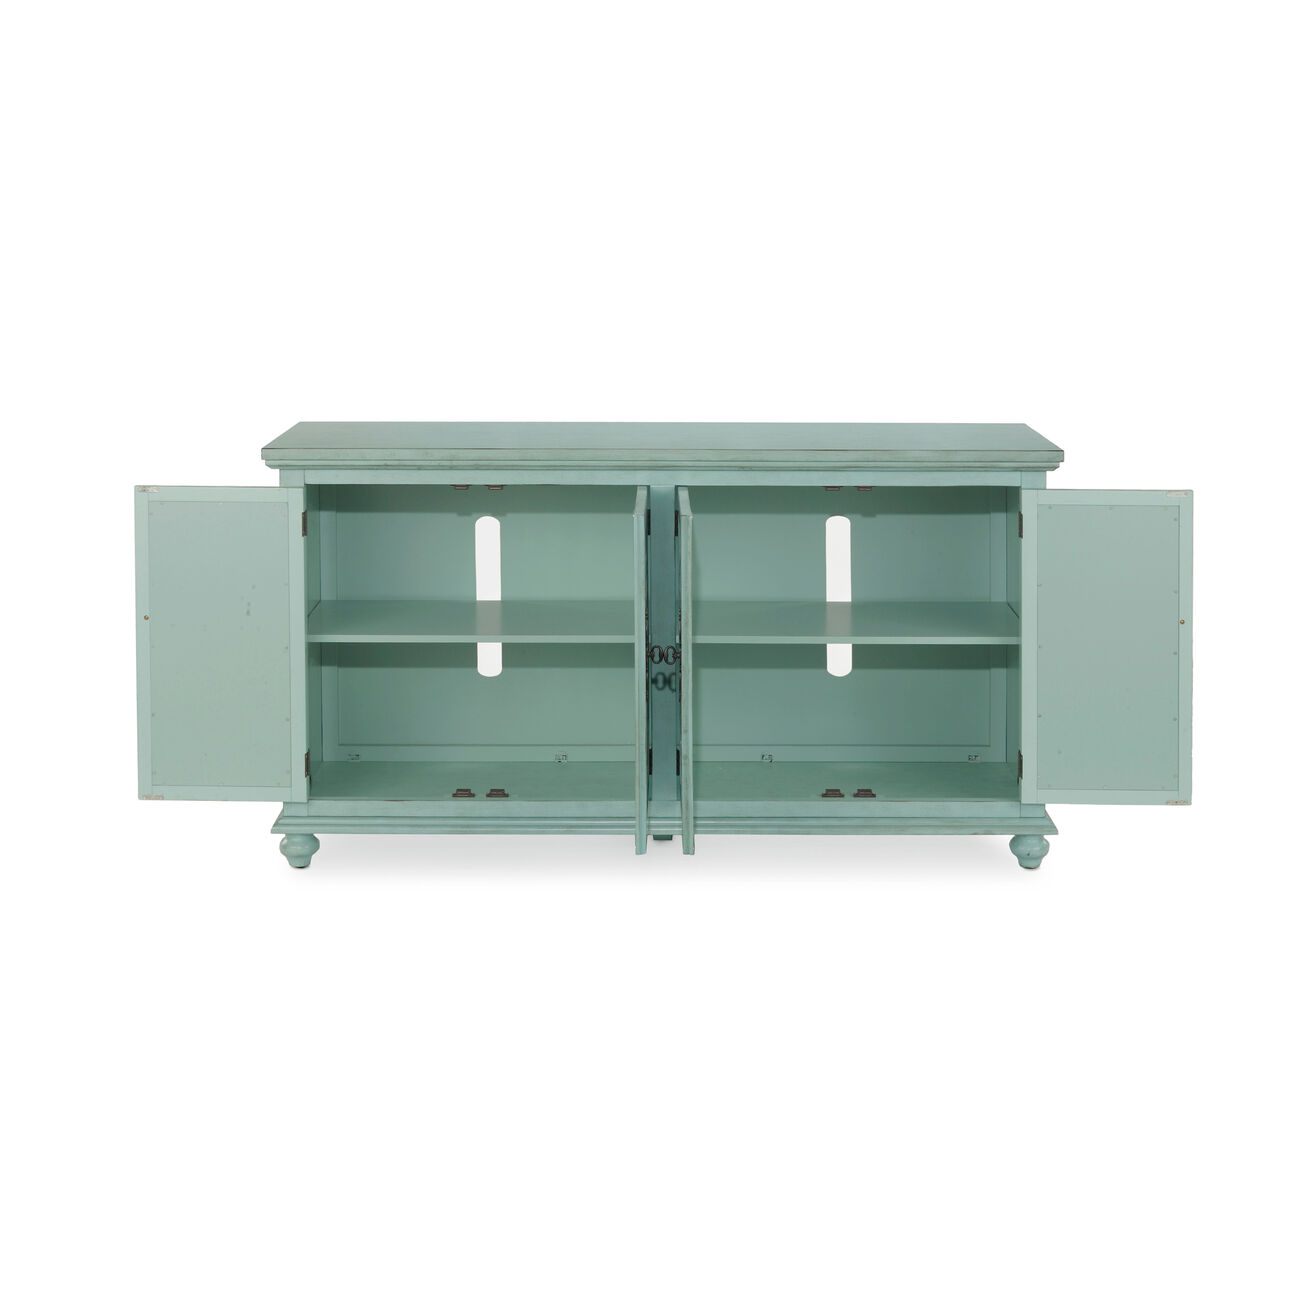 Trellis Front Wood and Glass TV stand with Cabinet Storage, Mint Green